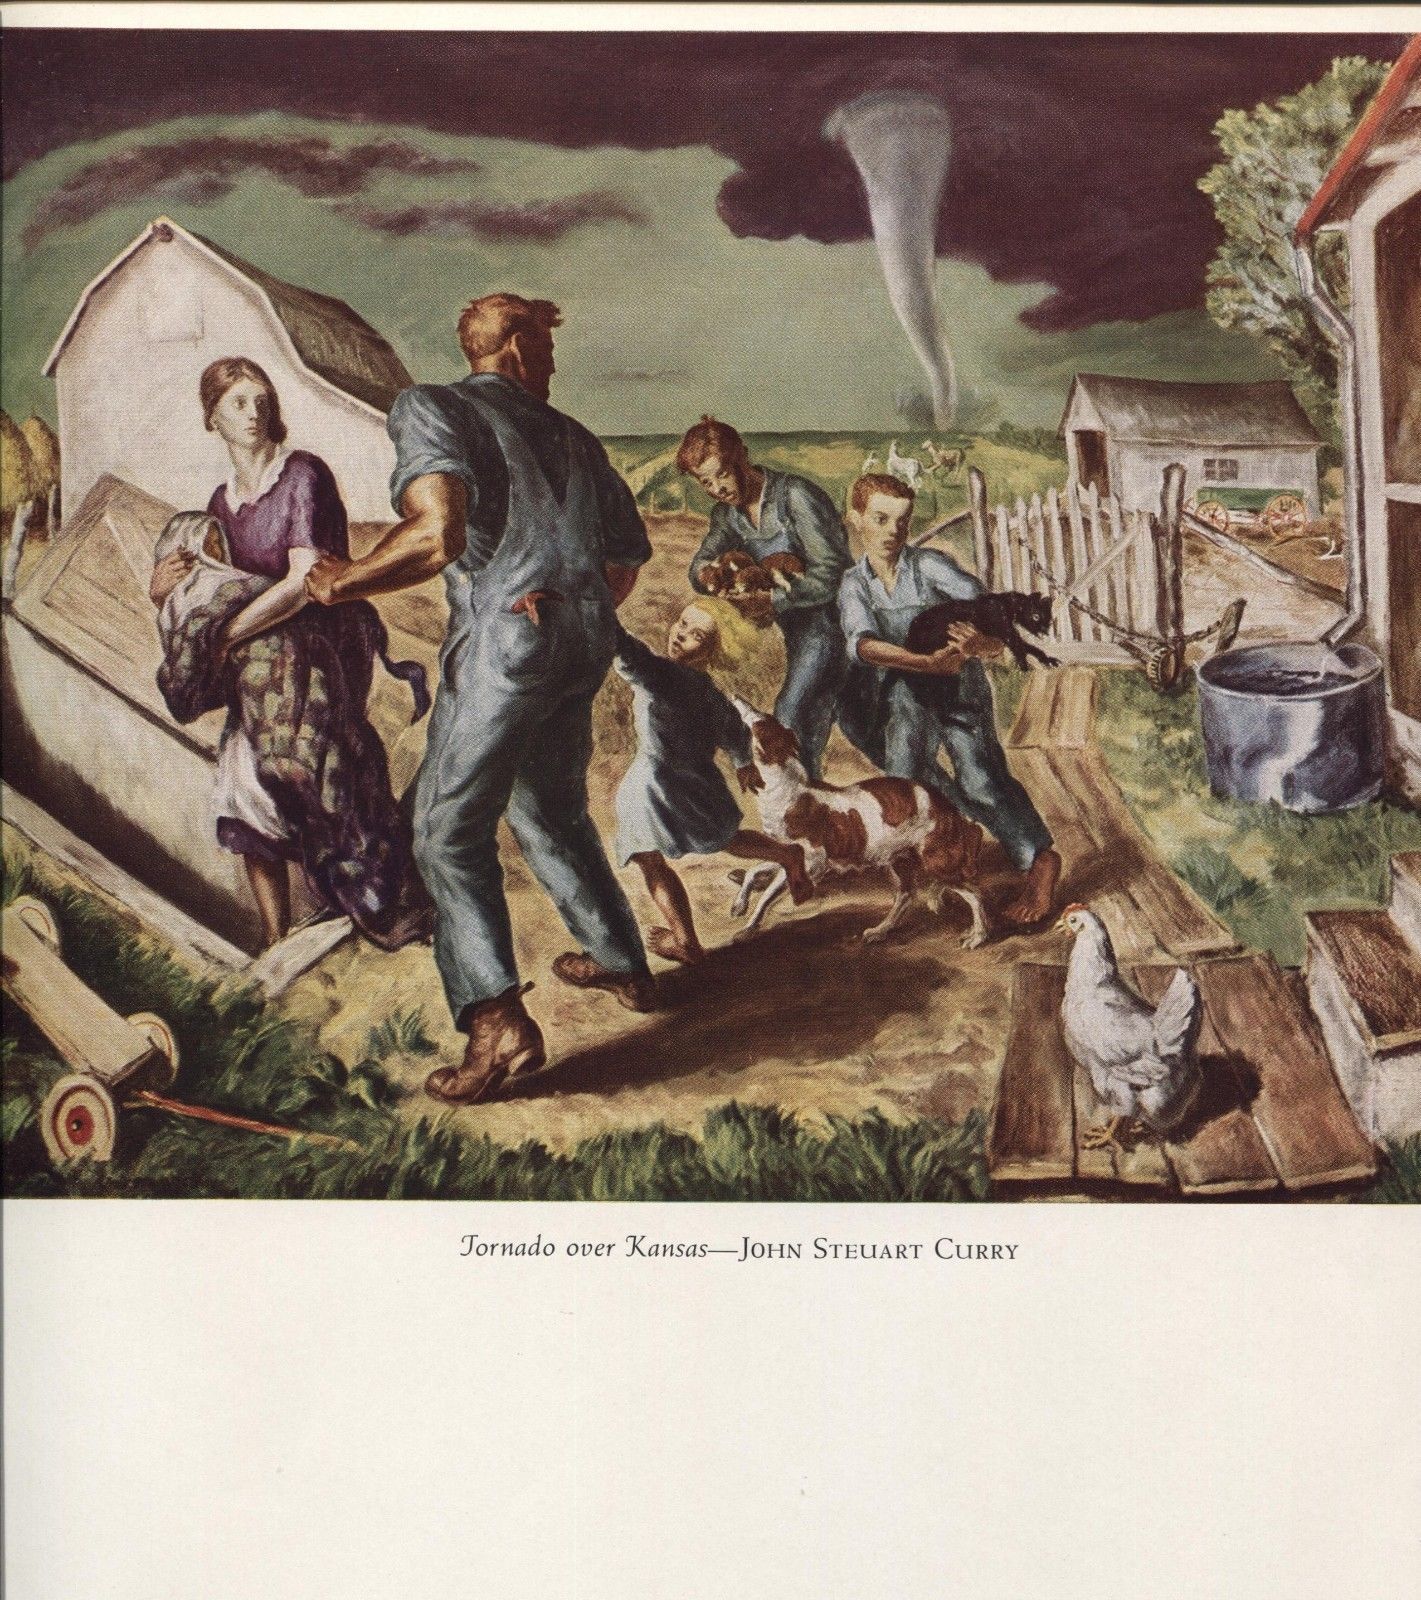 TORNADO OVER KANSAS FARM FAMILY CHILDREN DOG CAT SHELTER PAINTING BY CURRY REPRO 